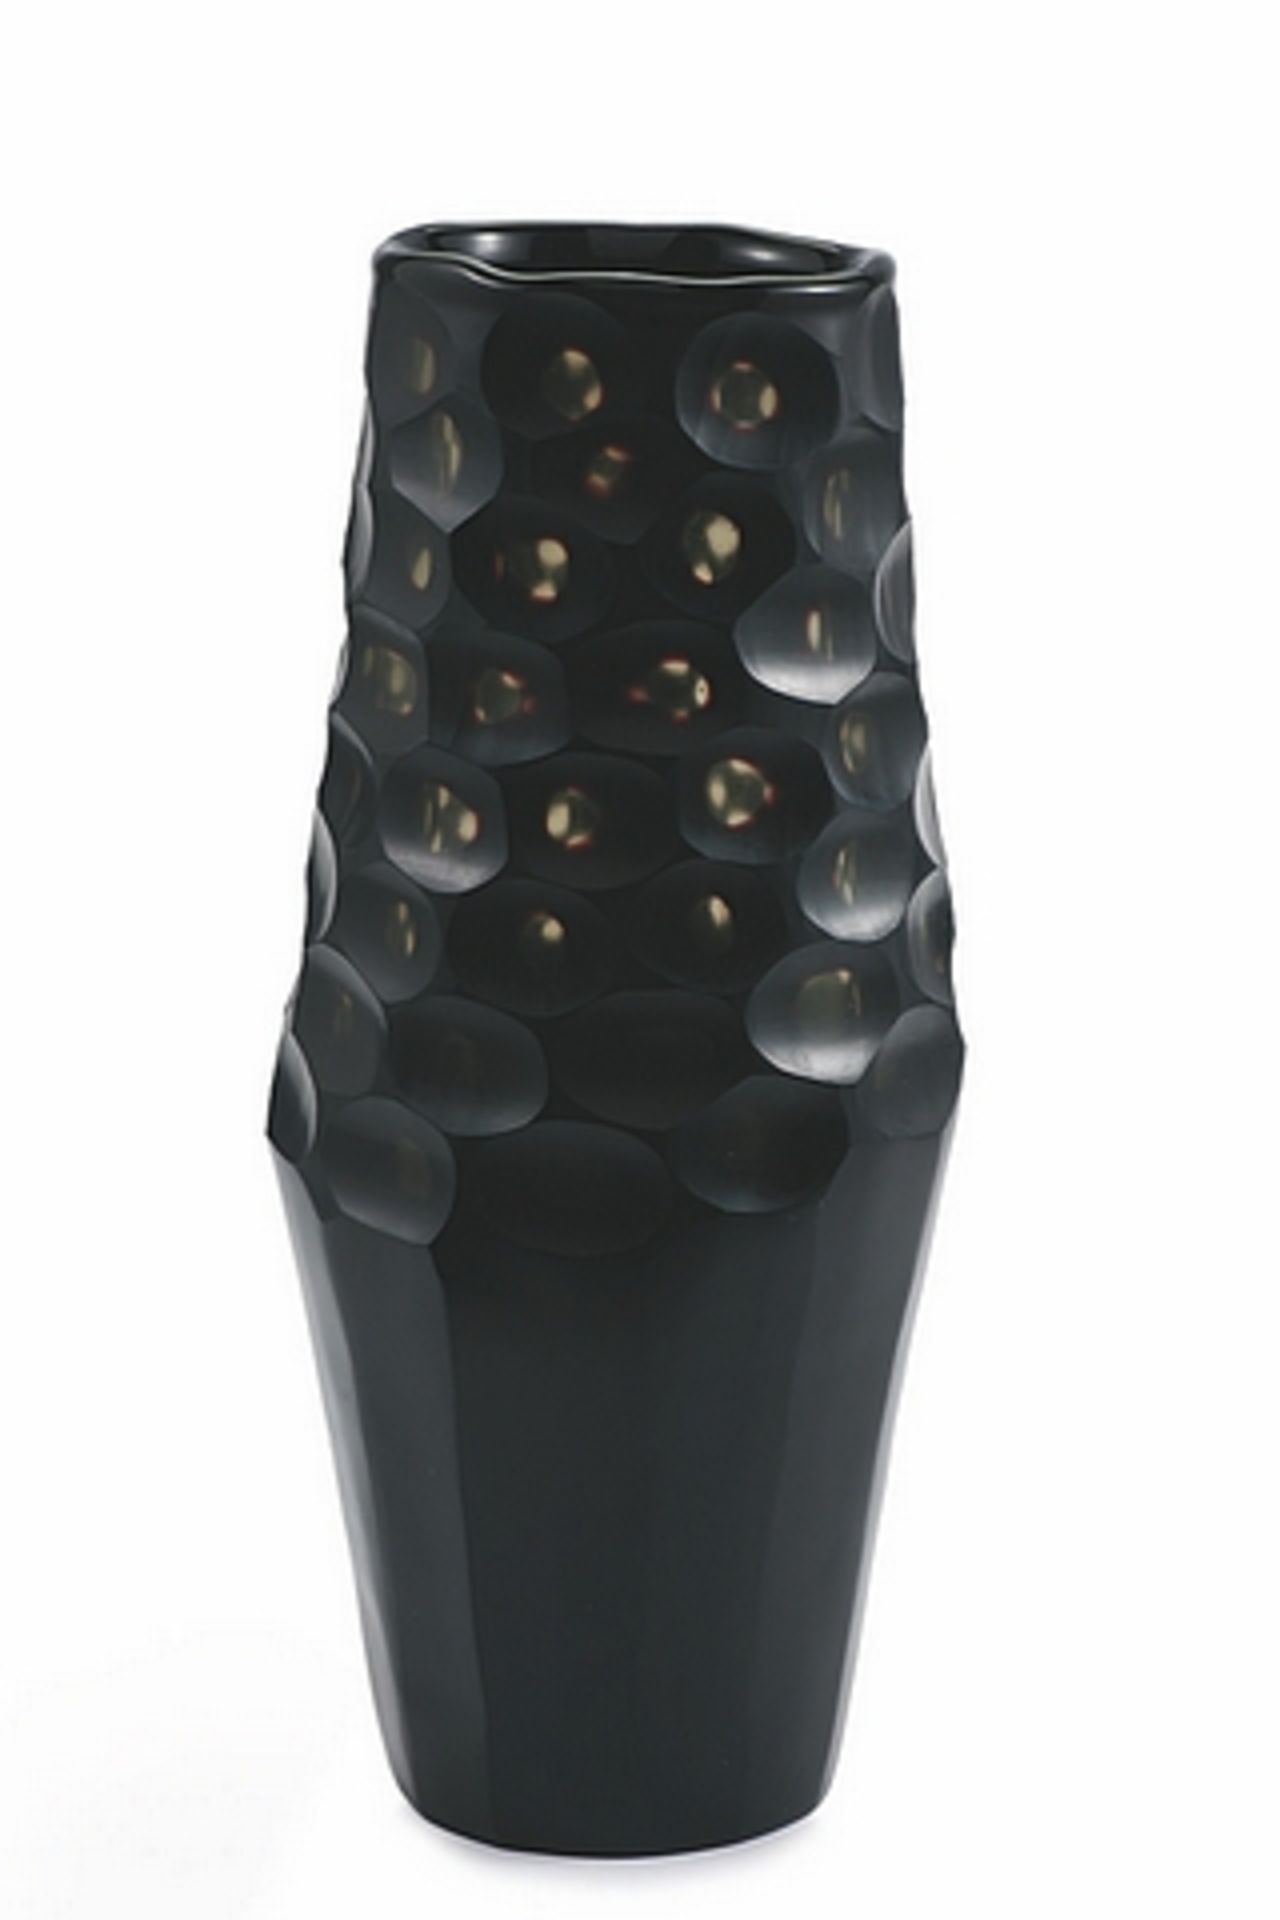 Vase honeycomb black clear black. A delightful and distinctive honeycomb pattern that makes this